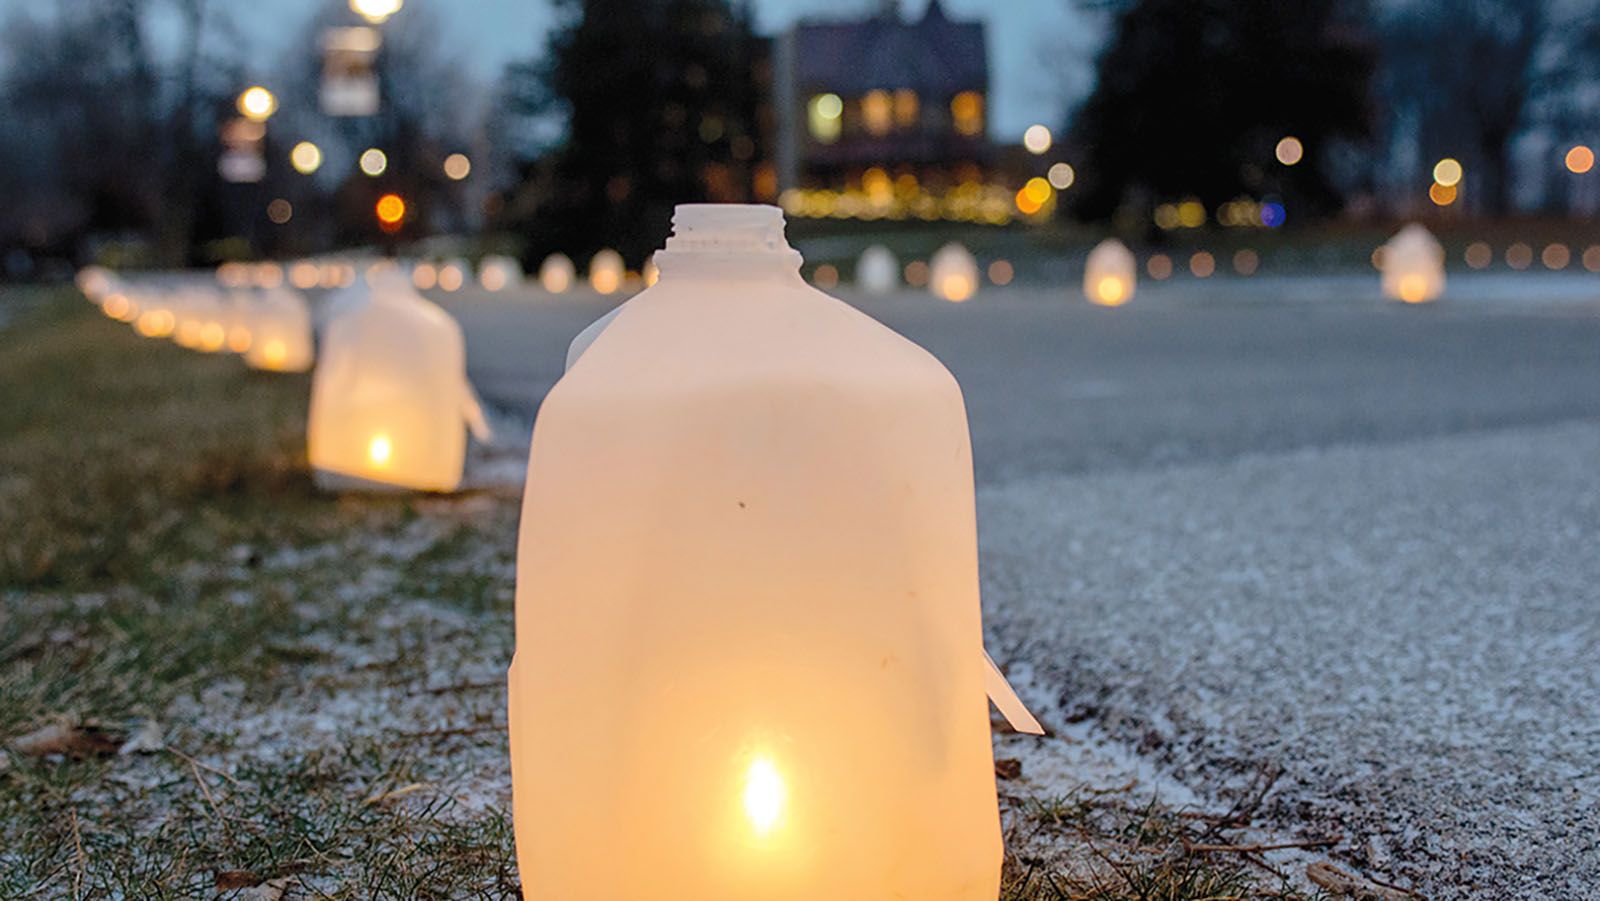 The Lighting of the Lake will take place at the University of Saint Francis on Sunday, Dec. 3.